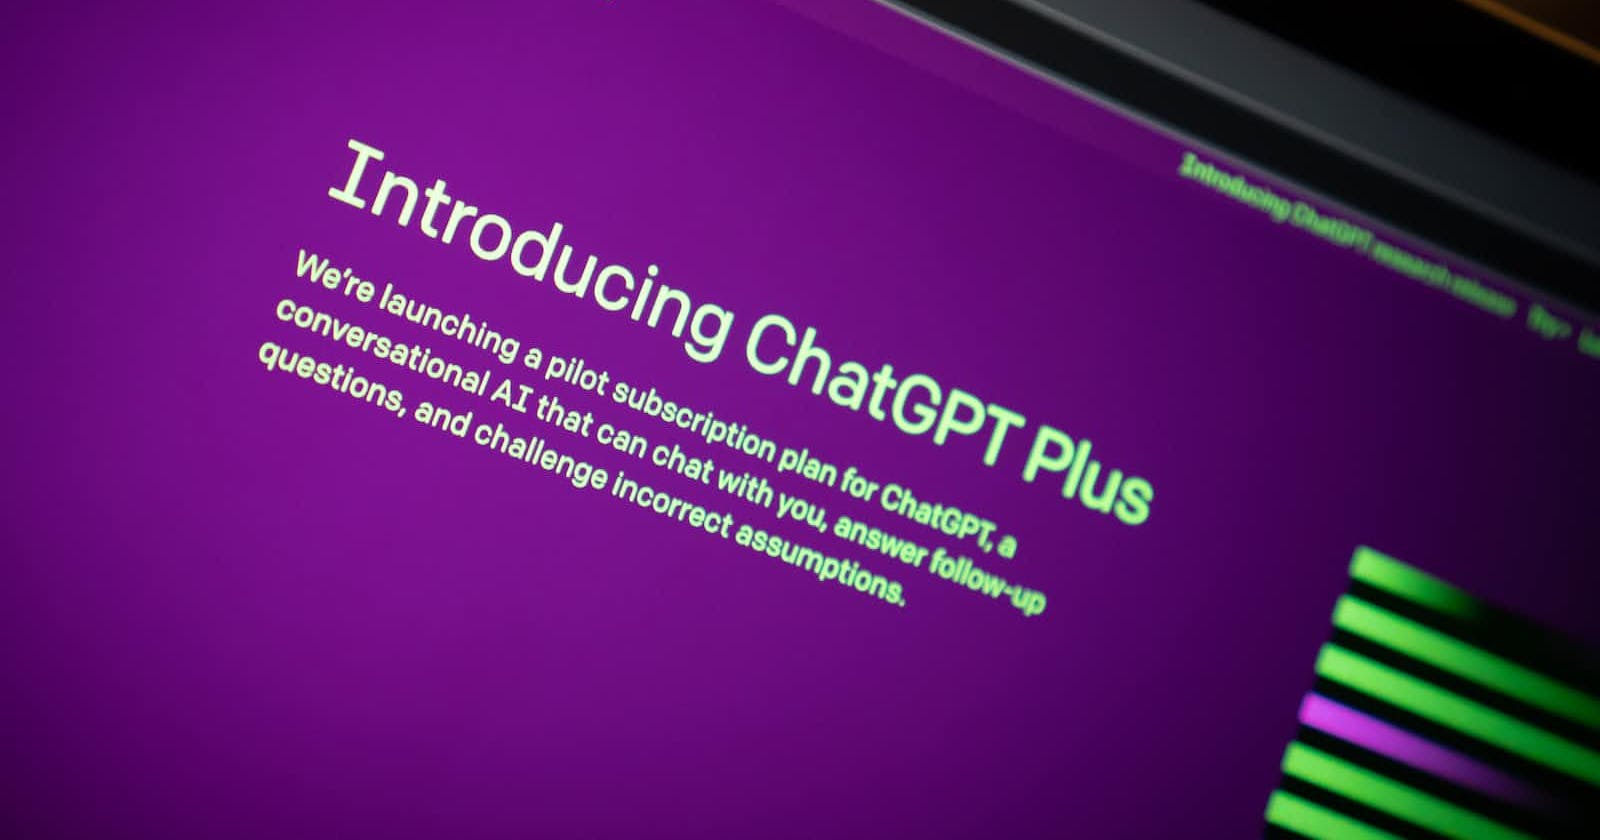 Effortlessly Enhance Your Workflow with the Help of ChatGPT